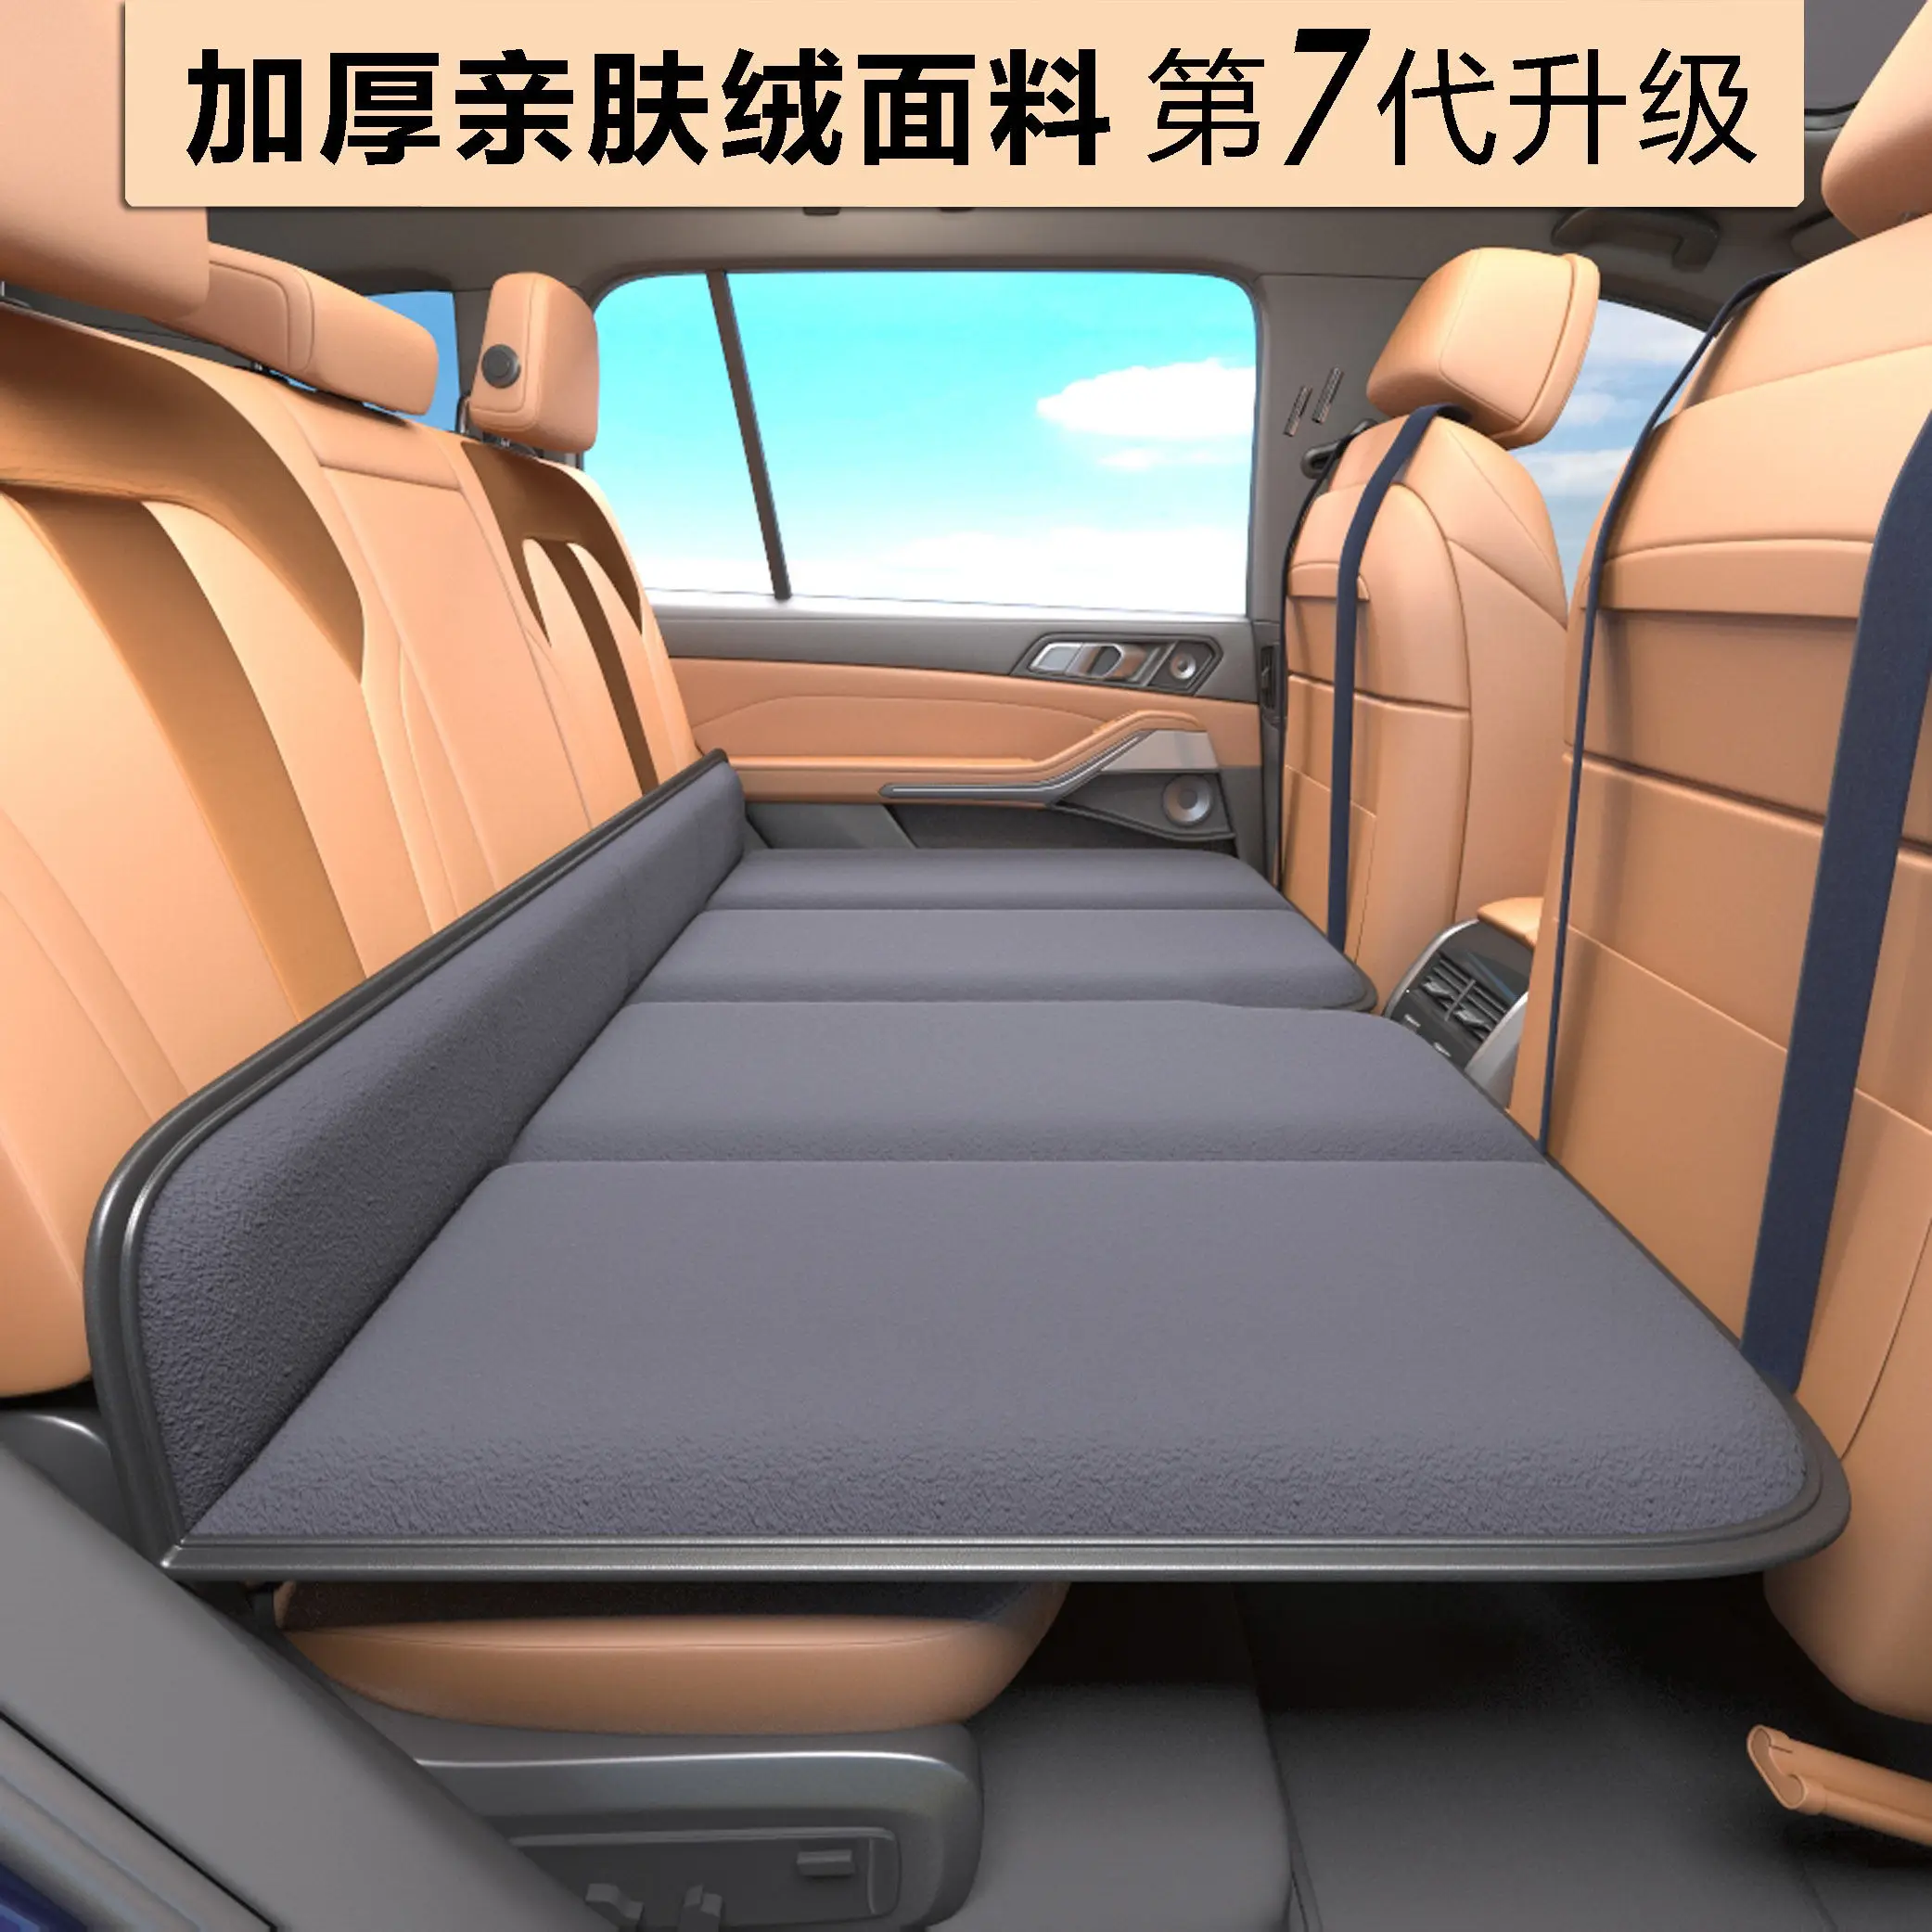 Non-inflatable Foldable Car Mattress Rear Seat Panel Cotton Car Car Seat Change Bed Sleeping Artifact Automobiles Car Travel Bed